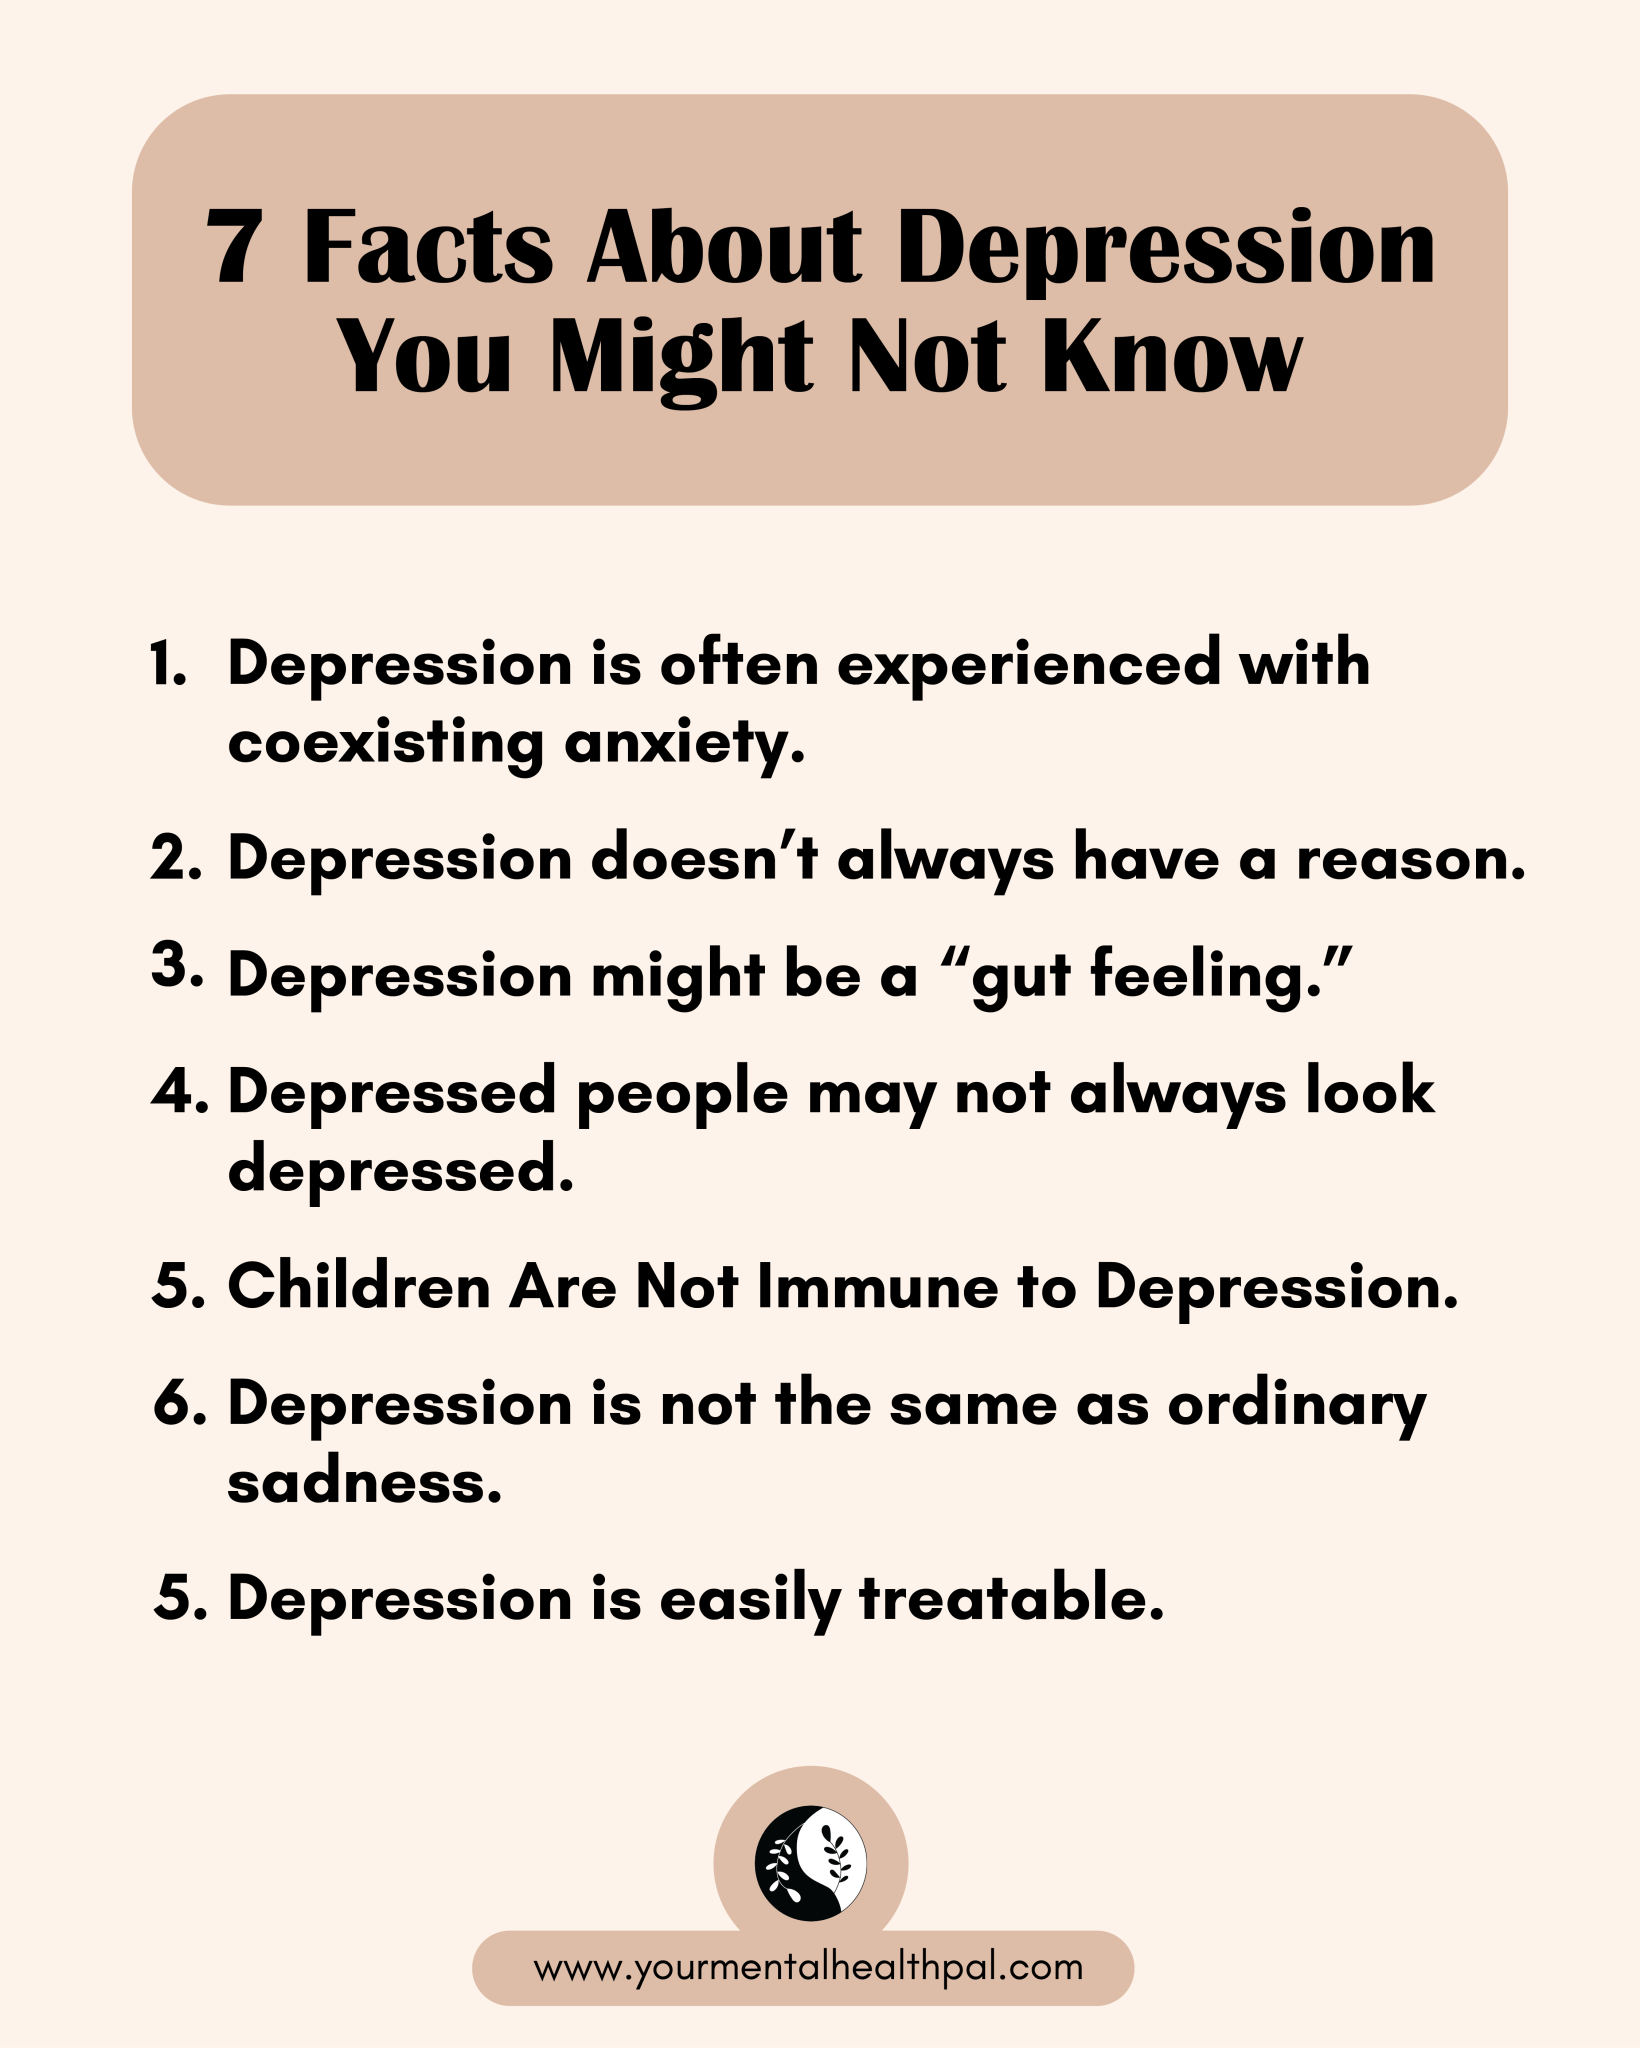 research article about depression